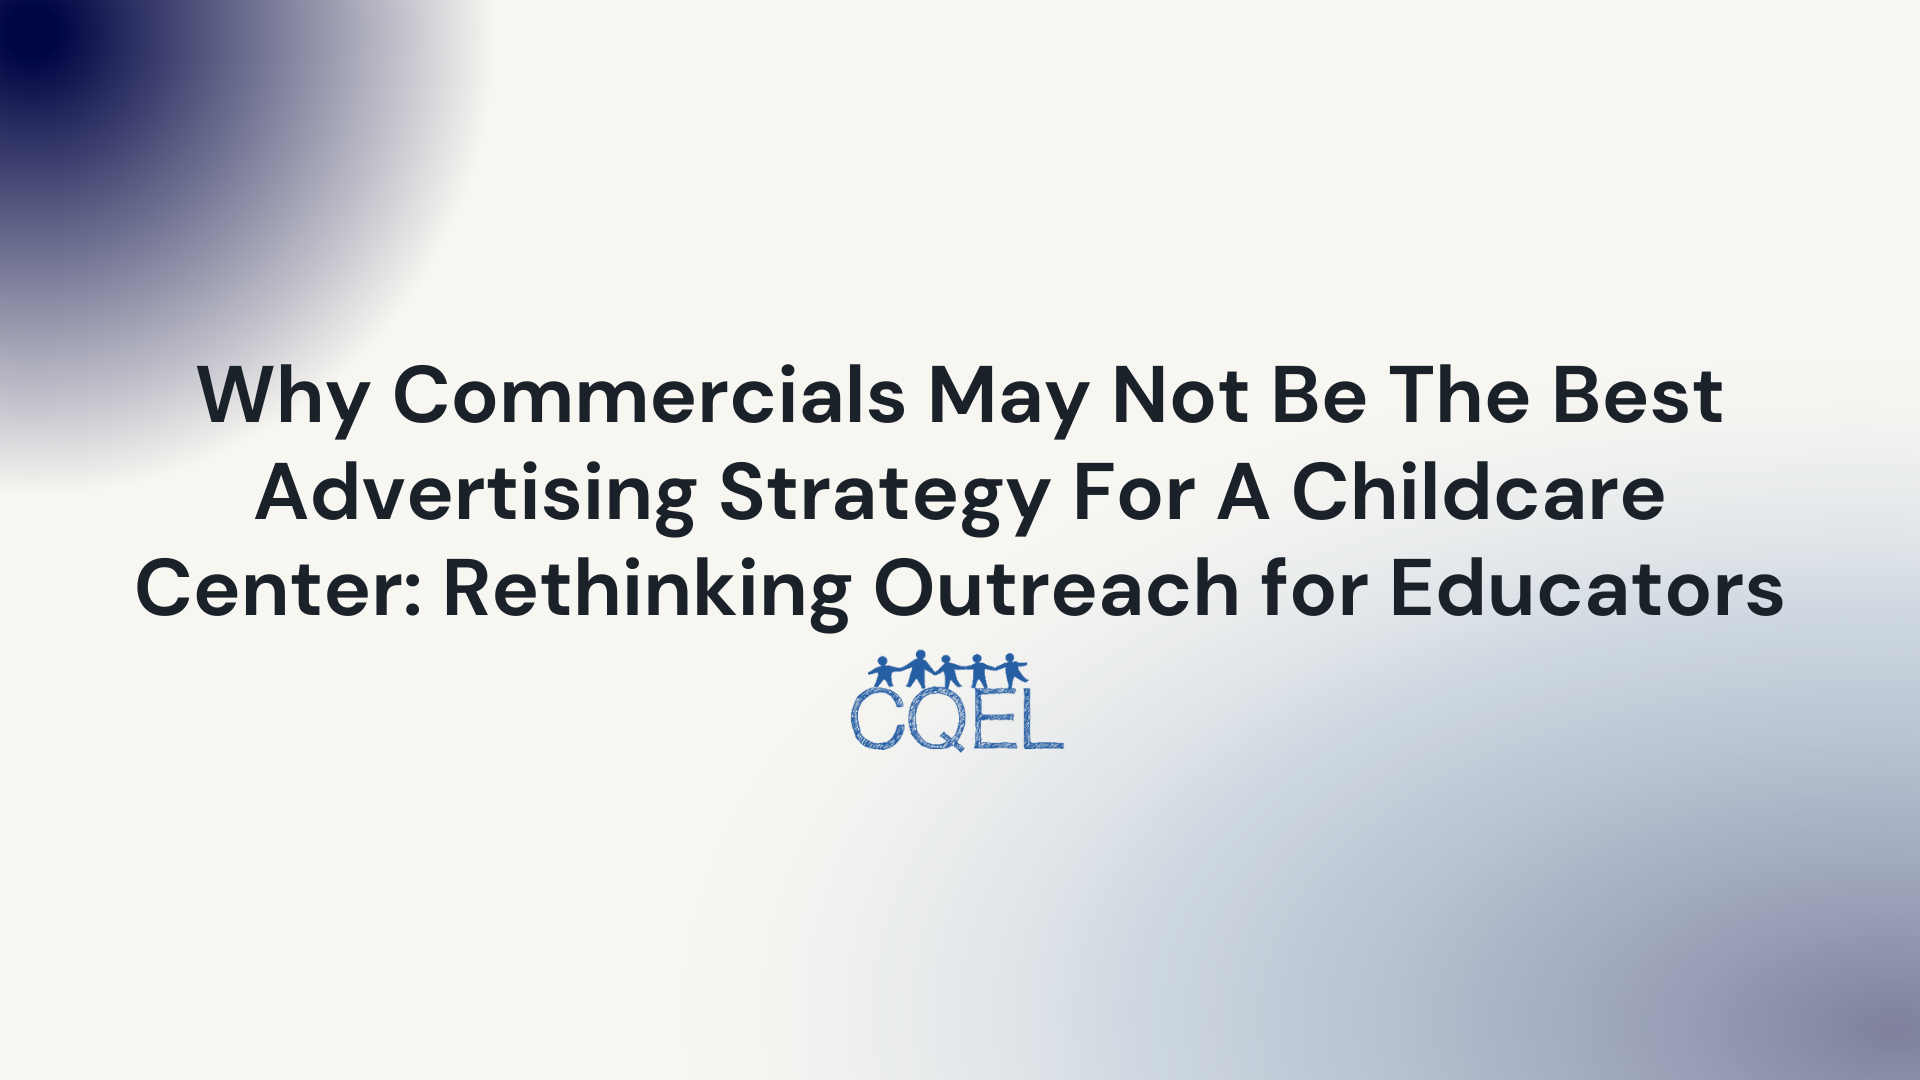 Why Commercials May Not Be The Best Advertising Strategy For A Childcare Center: Rethinking Outreach for Educators